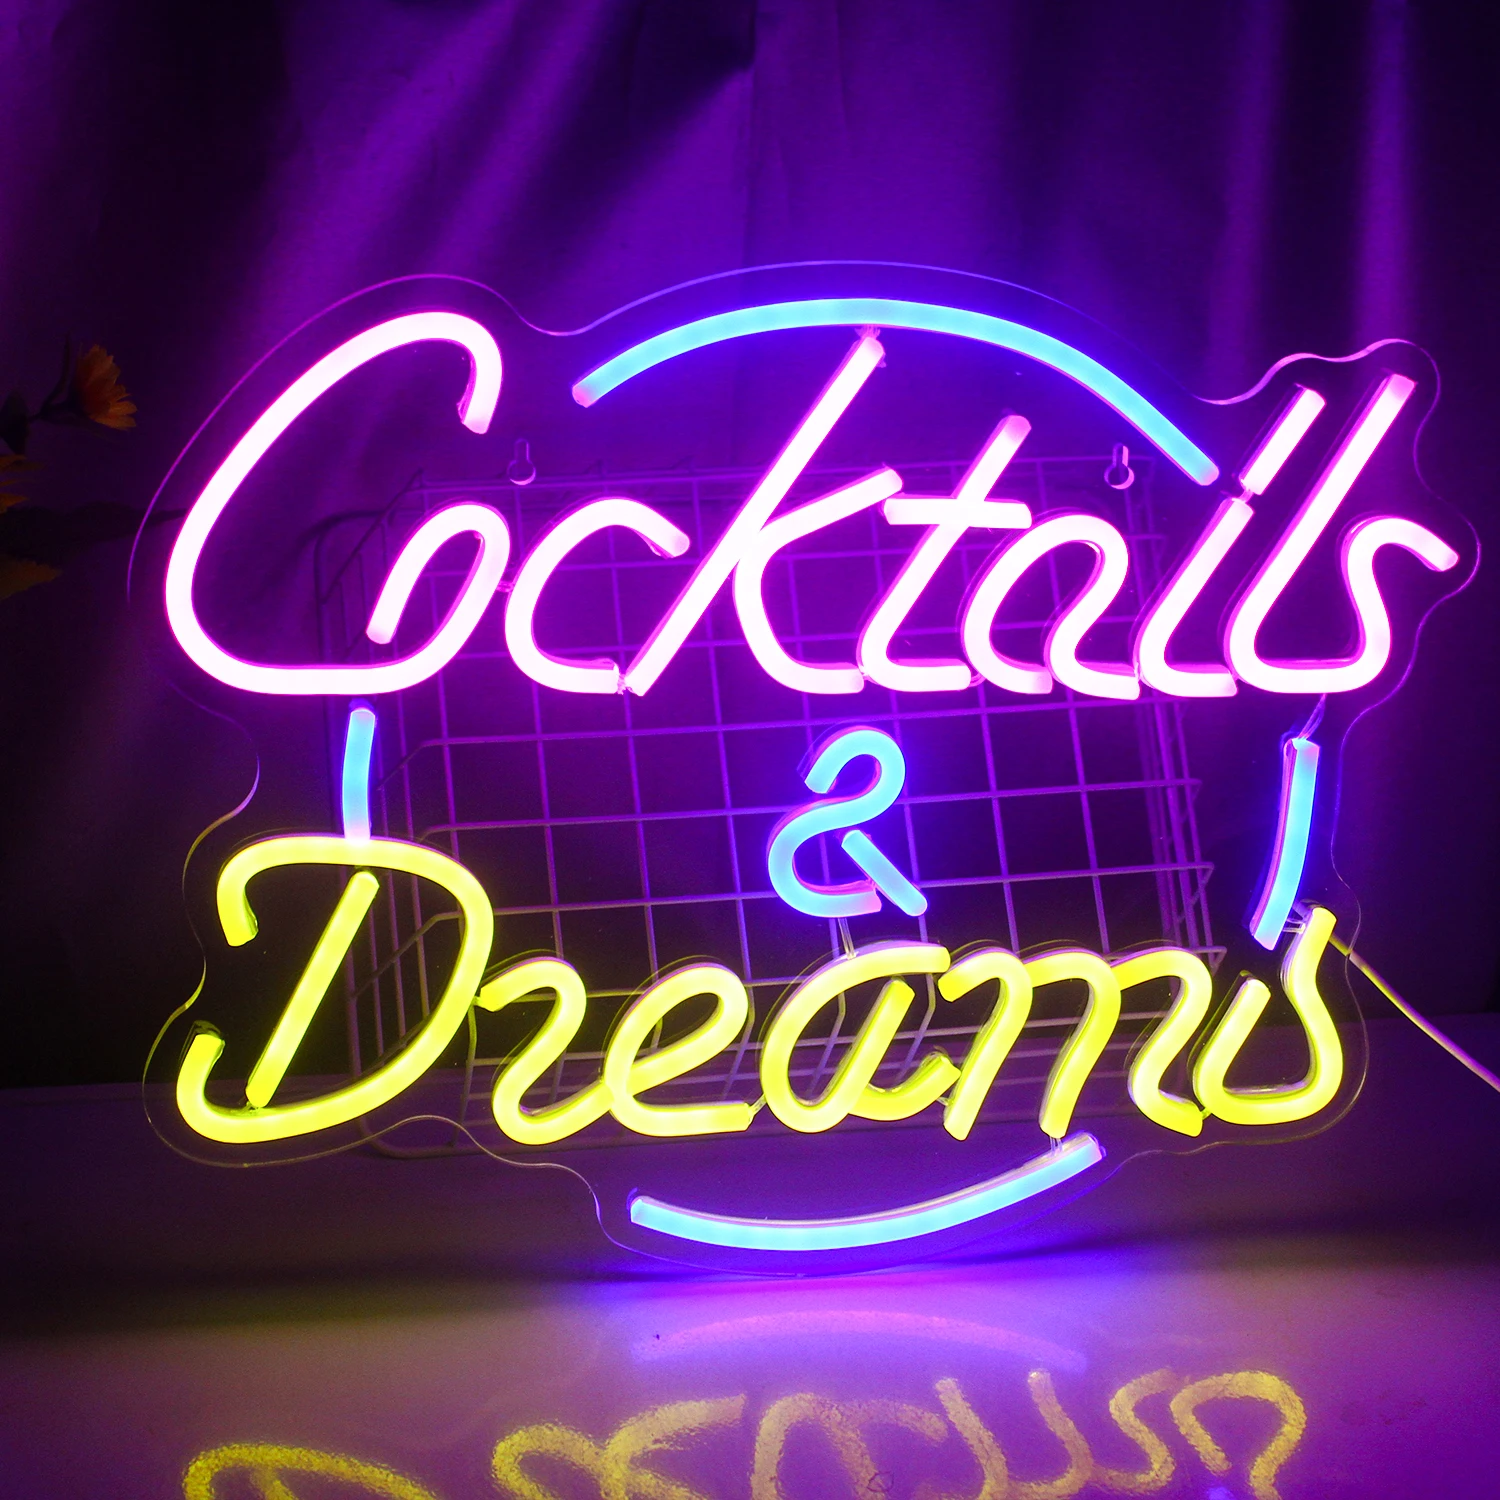 

Cocktails Neon Signs Beer Bar Club Bedroom Glass Neon Lights Sign for Hotel Pub Restaurant Man Cave Party Art Wall Lights